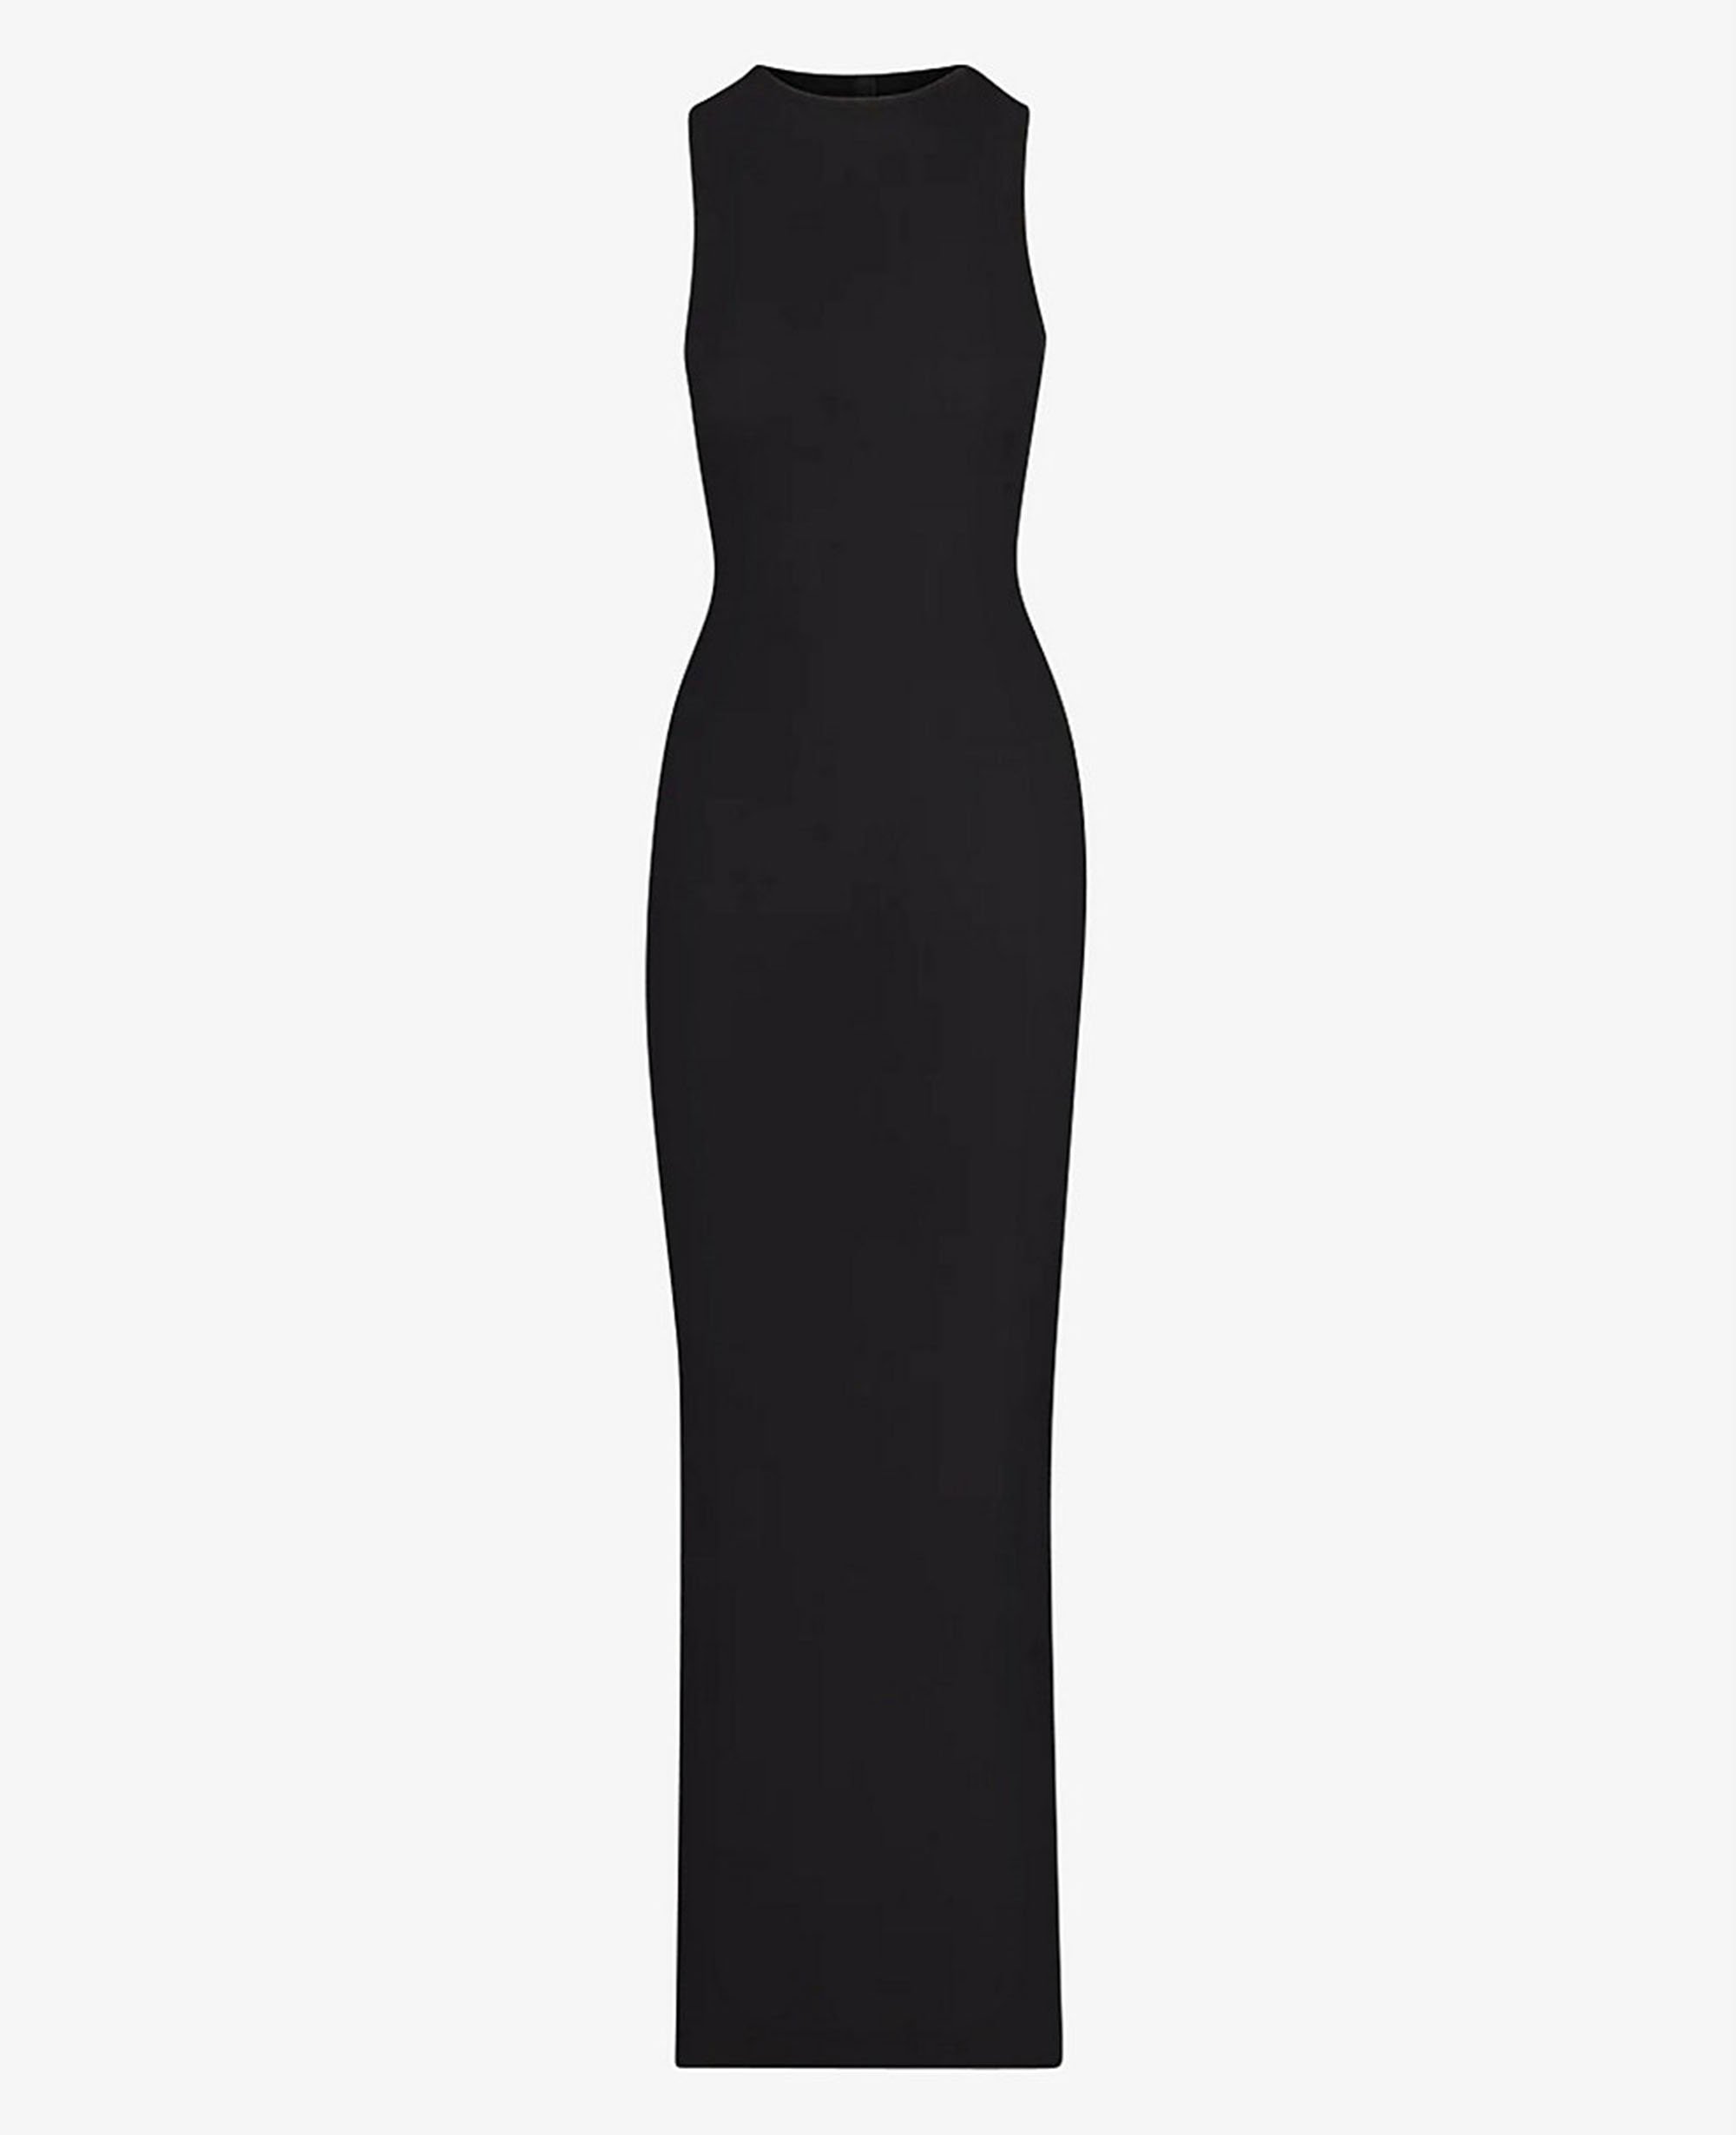 Shop This Flattering Skims Lookalike Dress for 45% Off